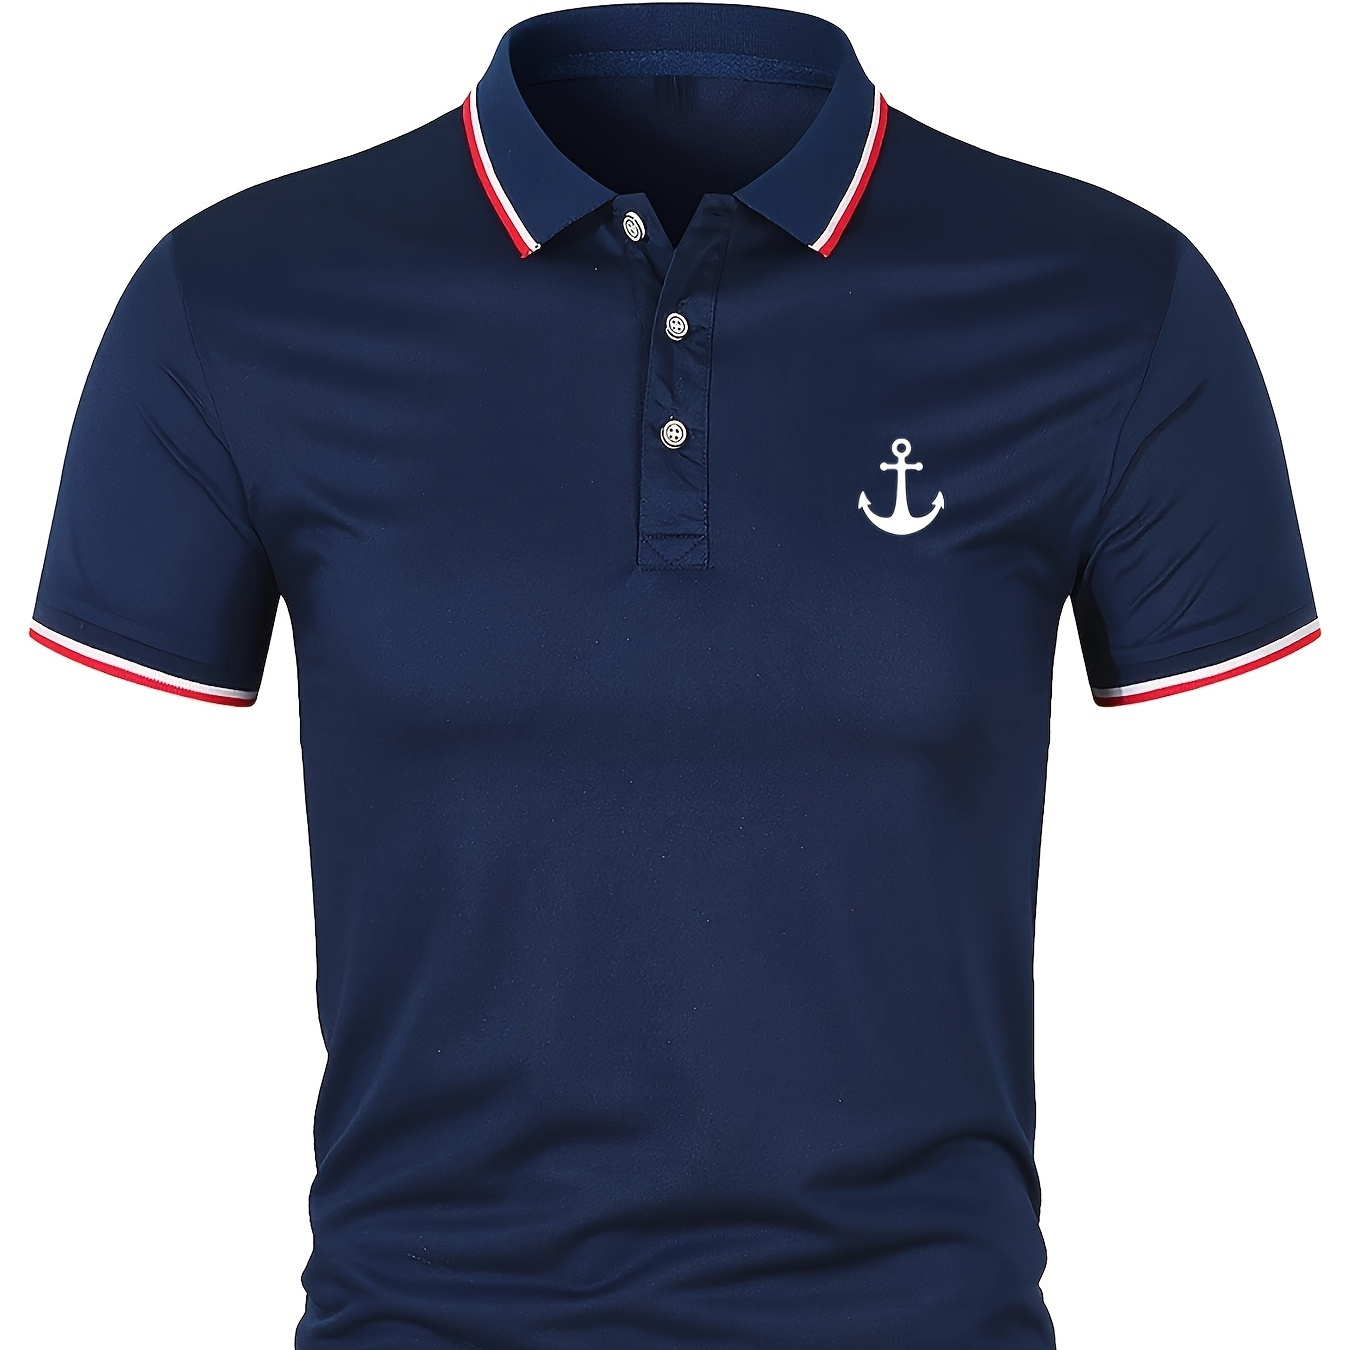 

Casual Nautical Anchor Print, Mature Charming Breathable And Comfortable Summer Short Sleeve Golf Shirt With Lapel Design, Suitable For Daily Life, Business And Sports Activity